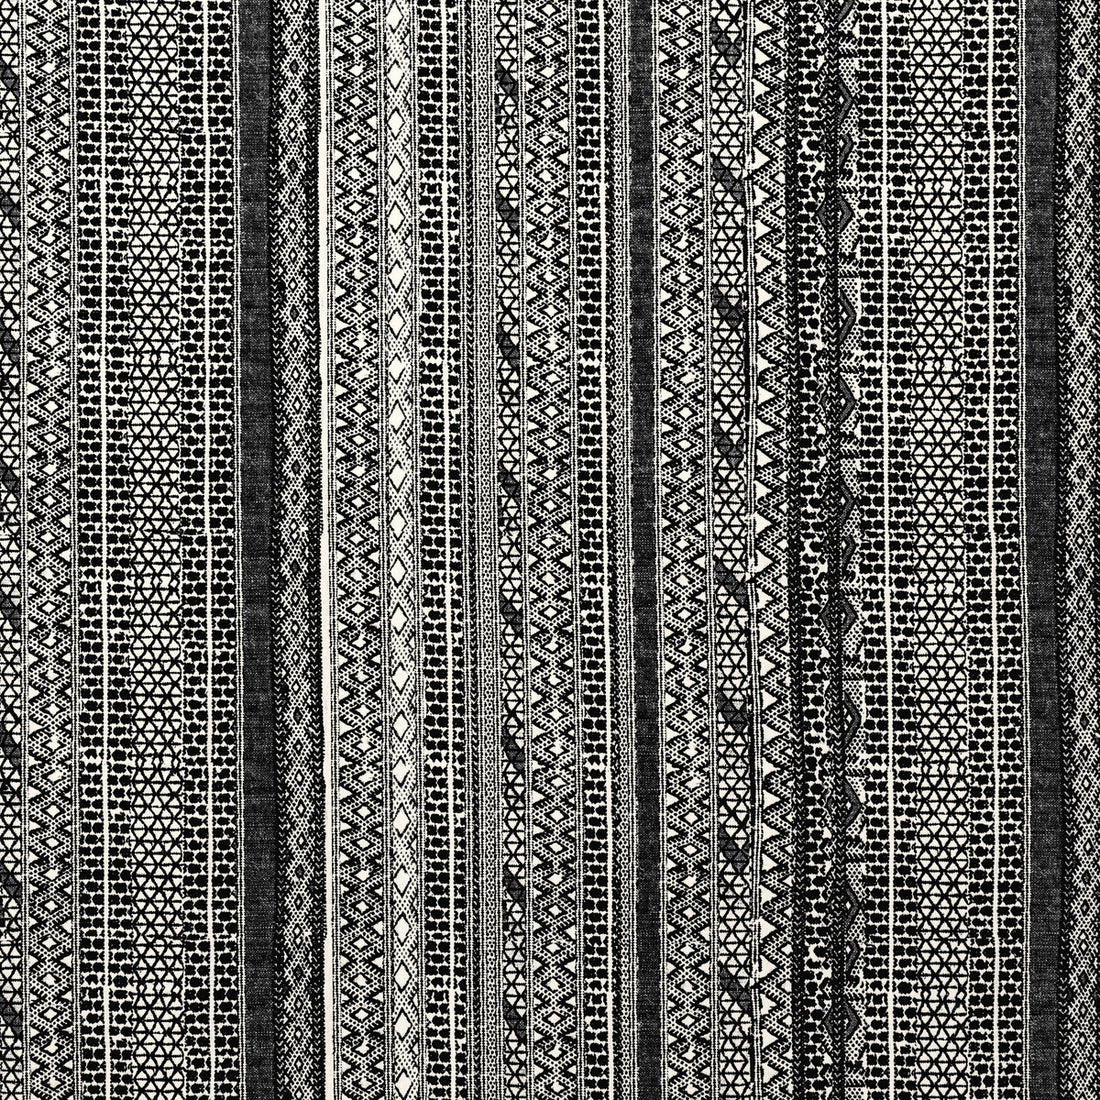 Hakan fabric in black color - pattern 2012100.81.0 - by Lee Jofa in the Breckenridge collection